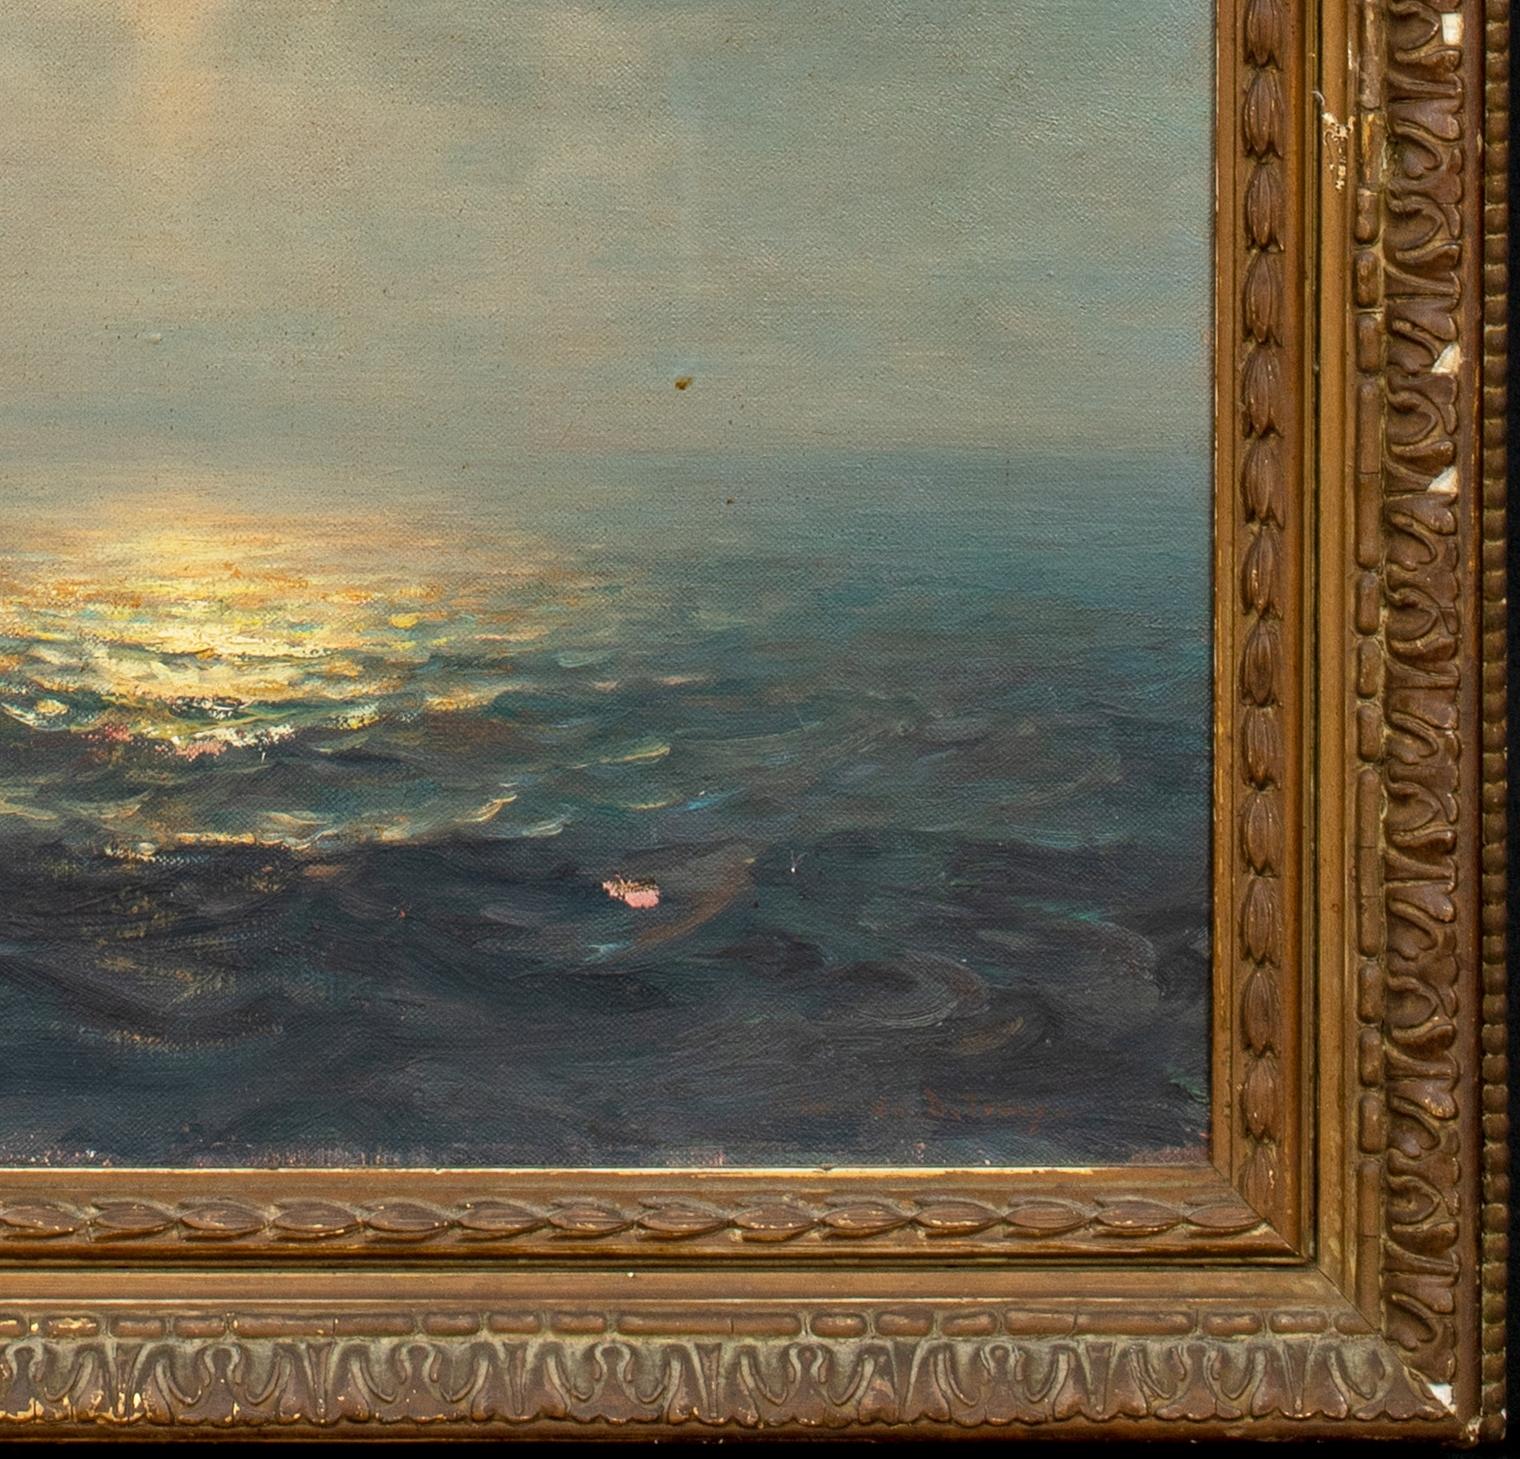 Sunset Over The Water, 19th century

by CHARLES D. TRACY (British School)

Fine 19th Century English sunset seascape, oil on canvas by Charles D Tracy. Excellent quality and condition example on the subject similar to the sunset marine paintings of